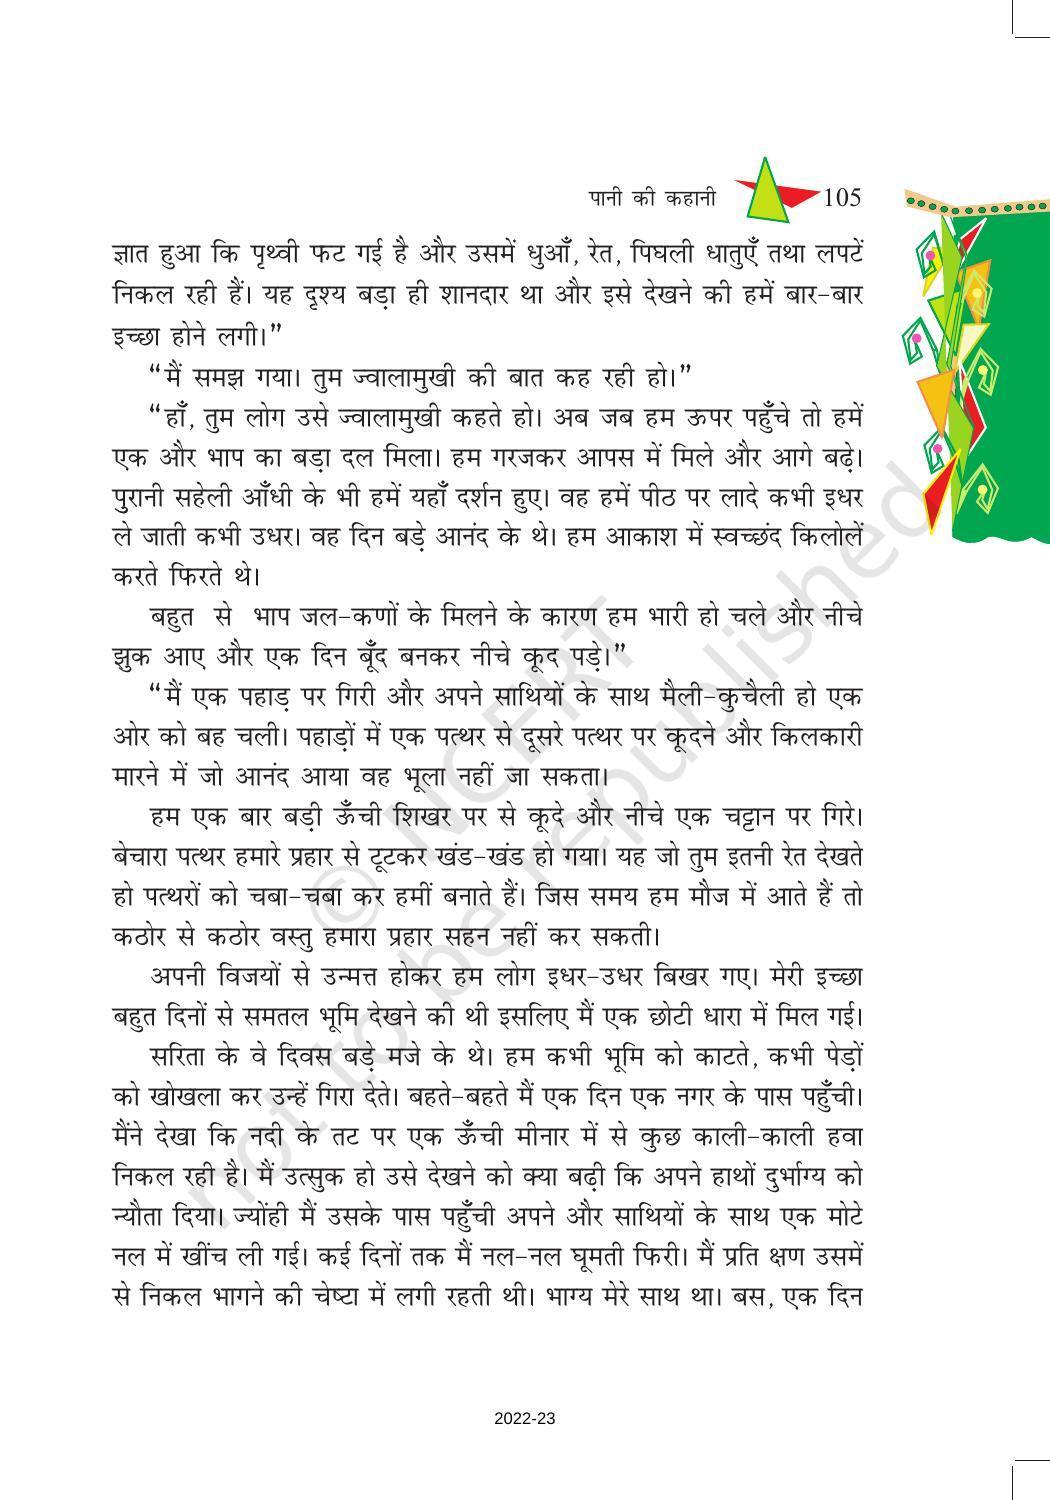 NCERT Book for Class 8 Hindi Vasant Chapter 16 पानी की कहानी - Page 8